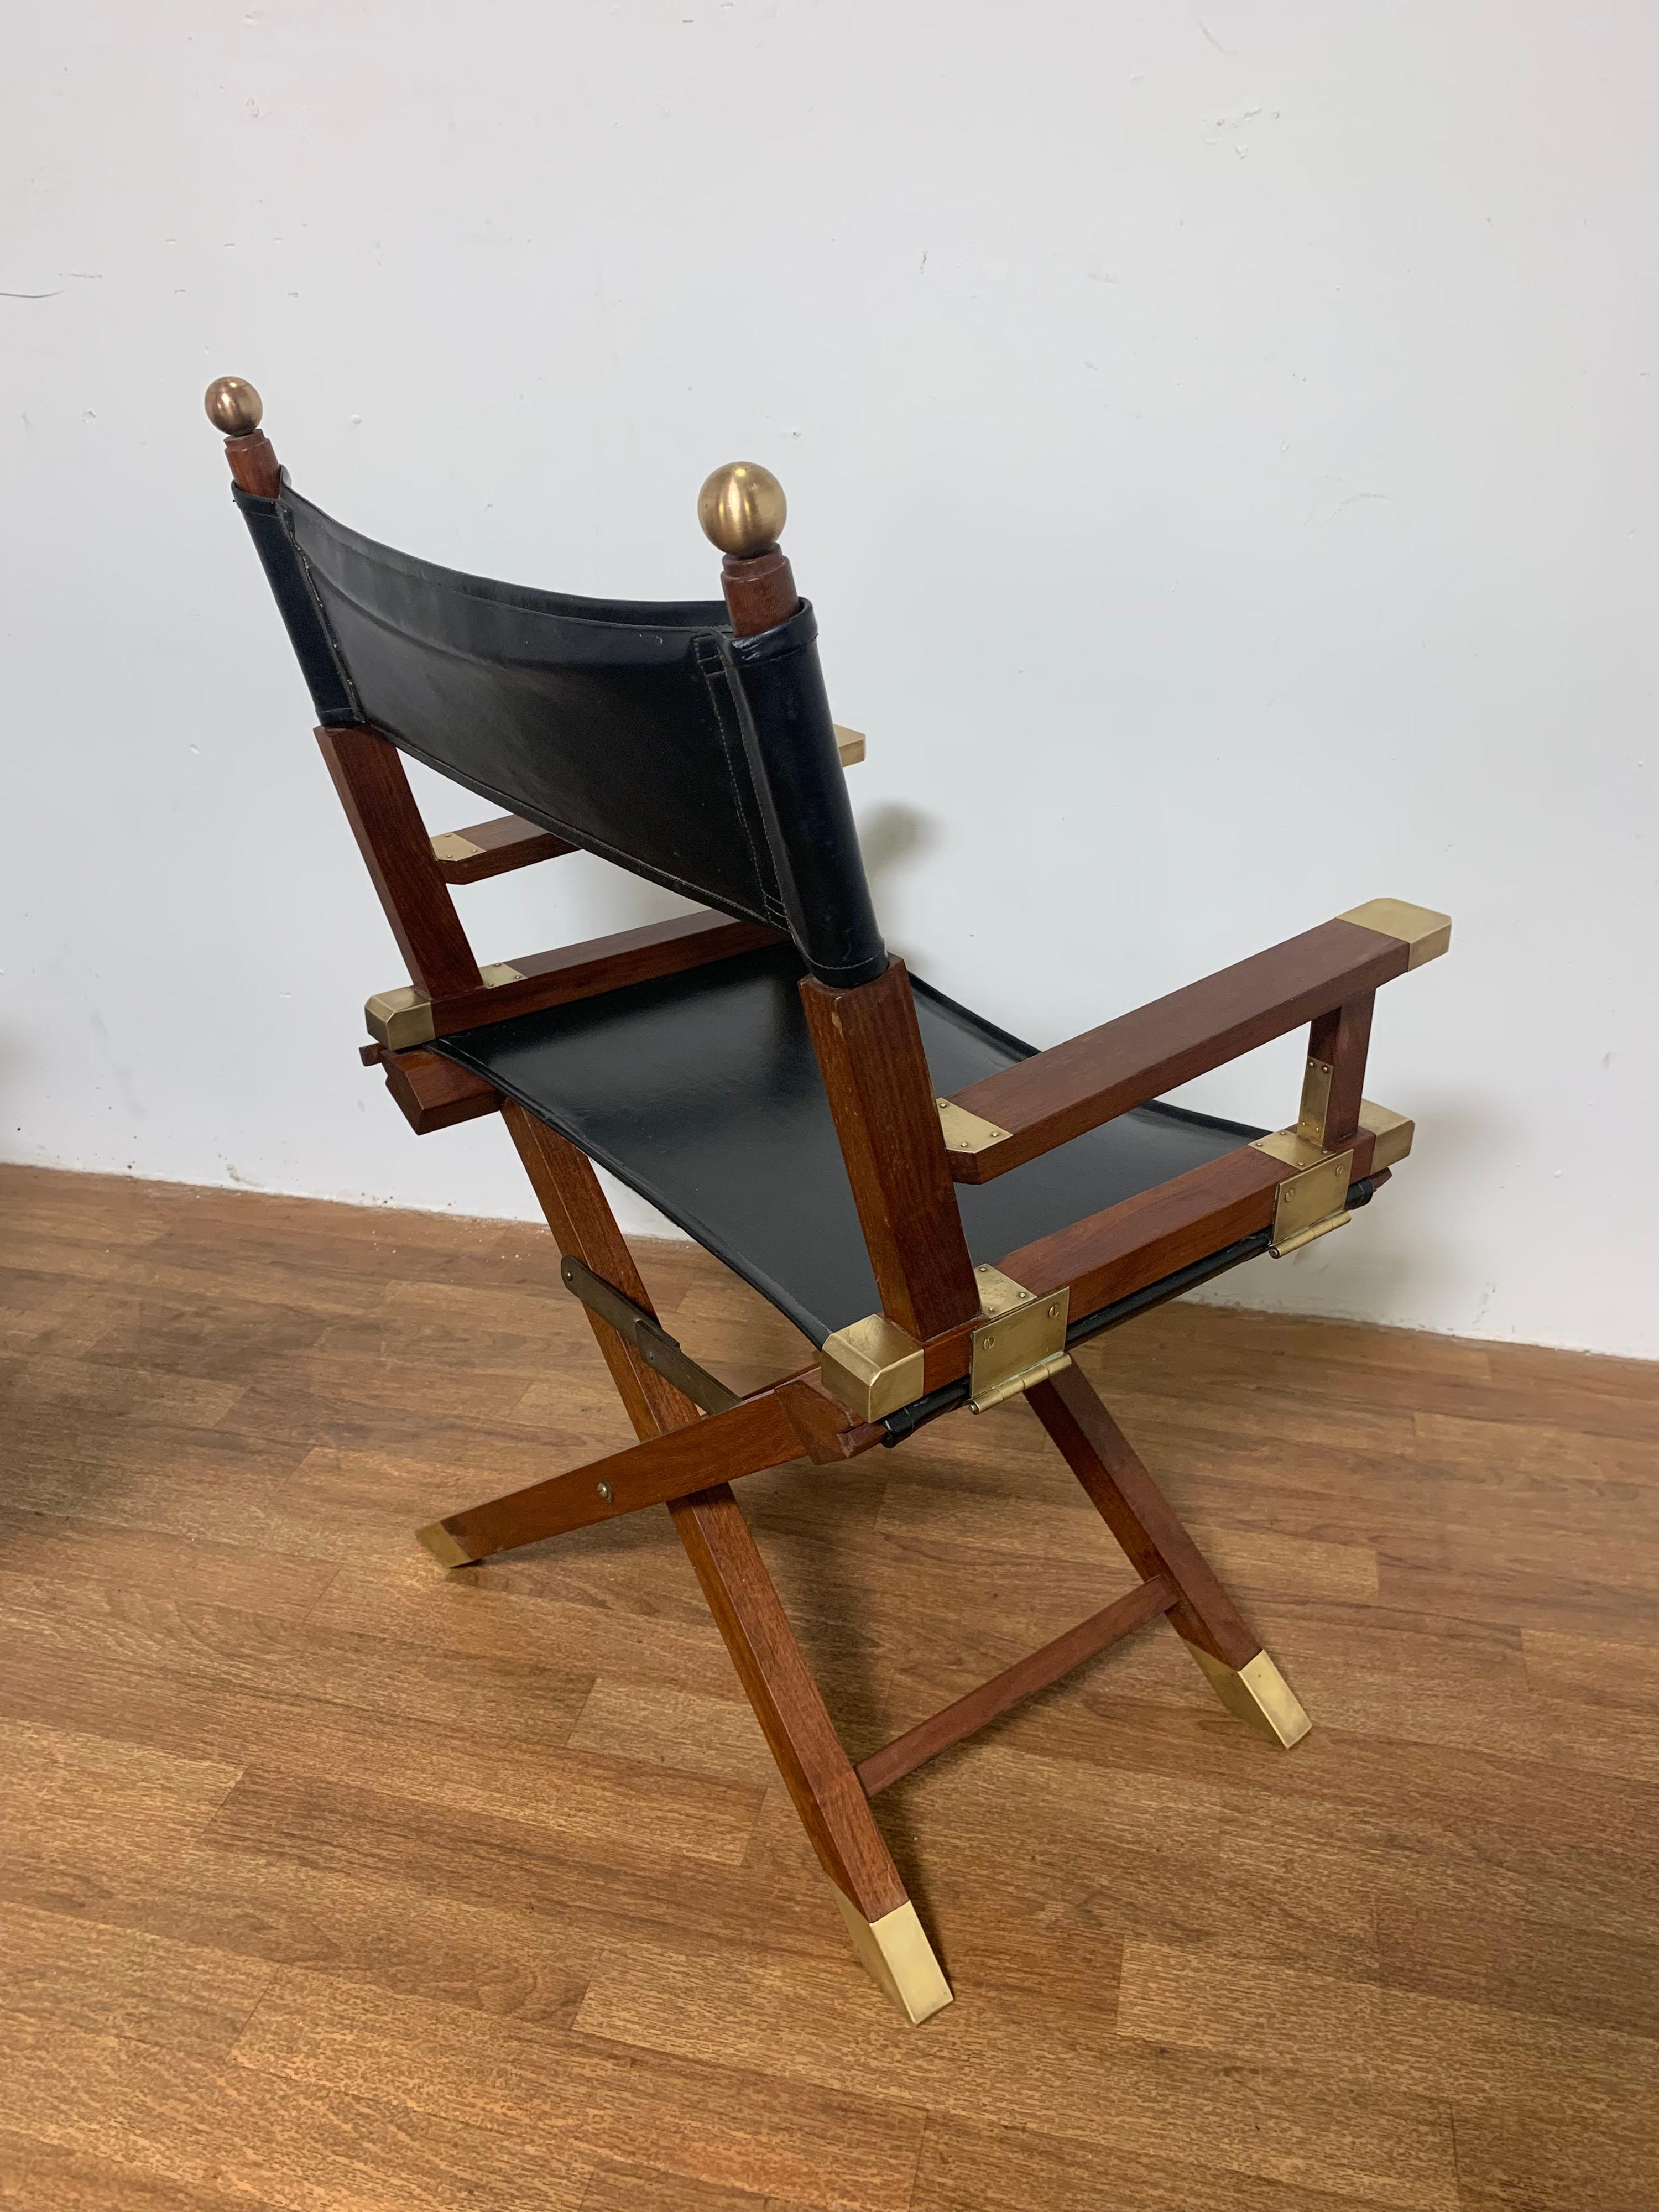 Pair of Bespoke Charlotte Horstmann Rosewood and Brass Campaign Chairs, C. 1950s For Sale 1